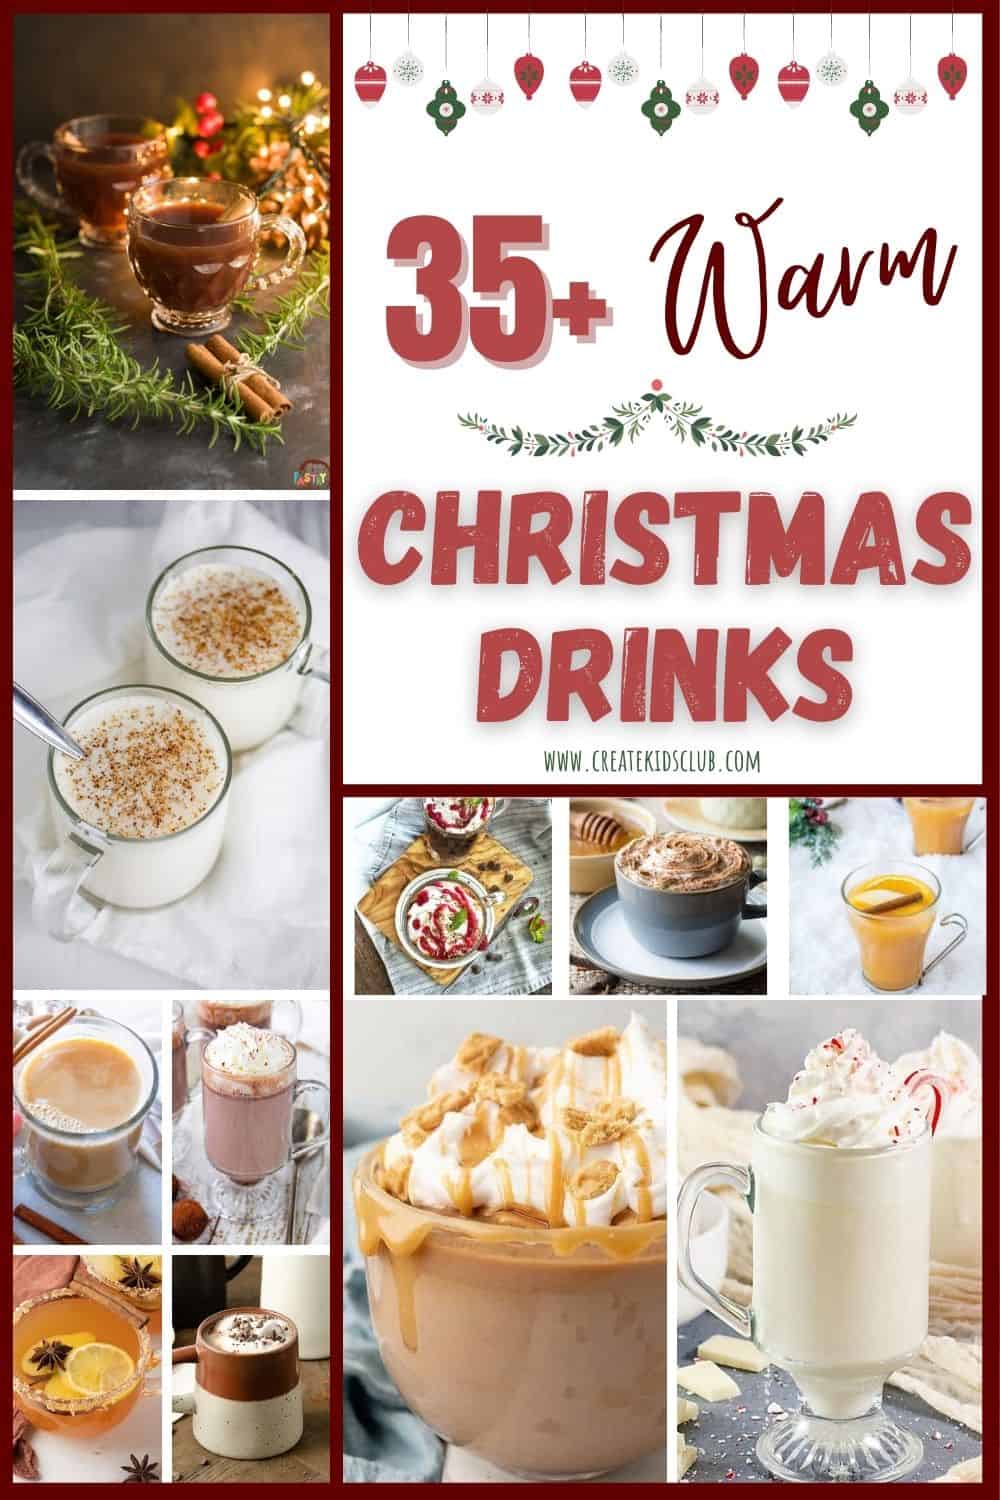 11 pictures of warm Christmas drink recipes.